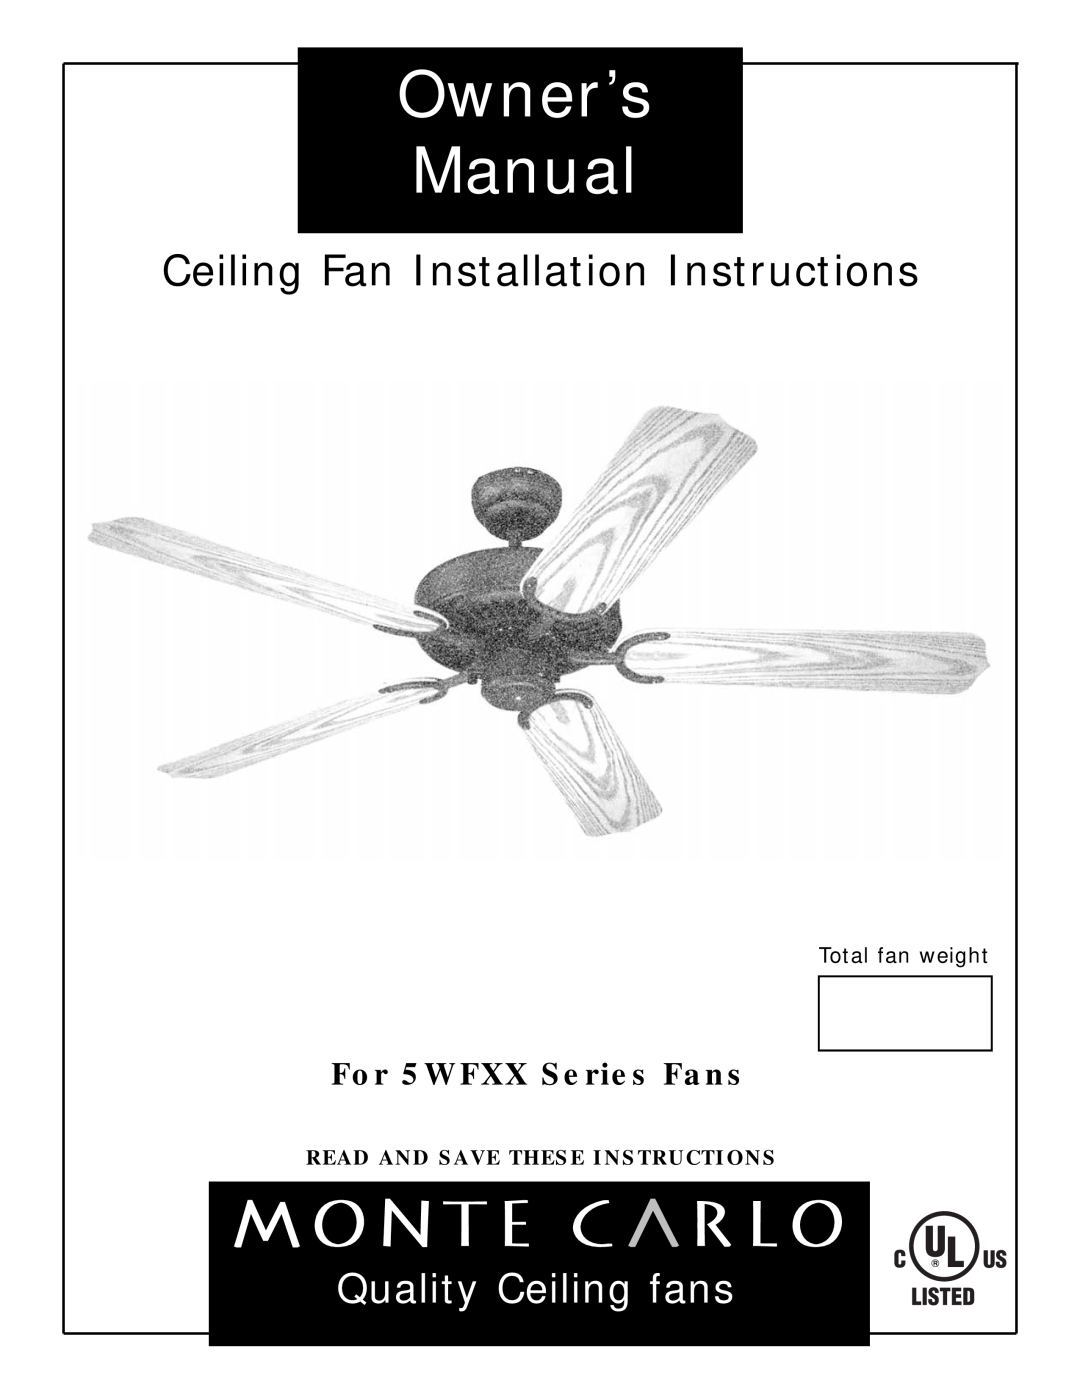 Monte Carlo Fan Company owner manual For 5WFXX Series Fans, Total fan weight, Read And Save These Instructions 